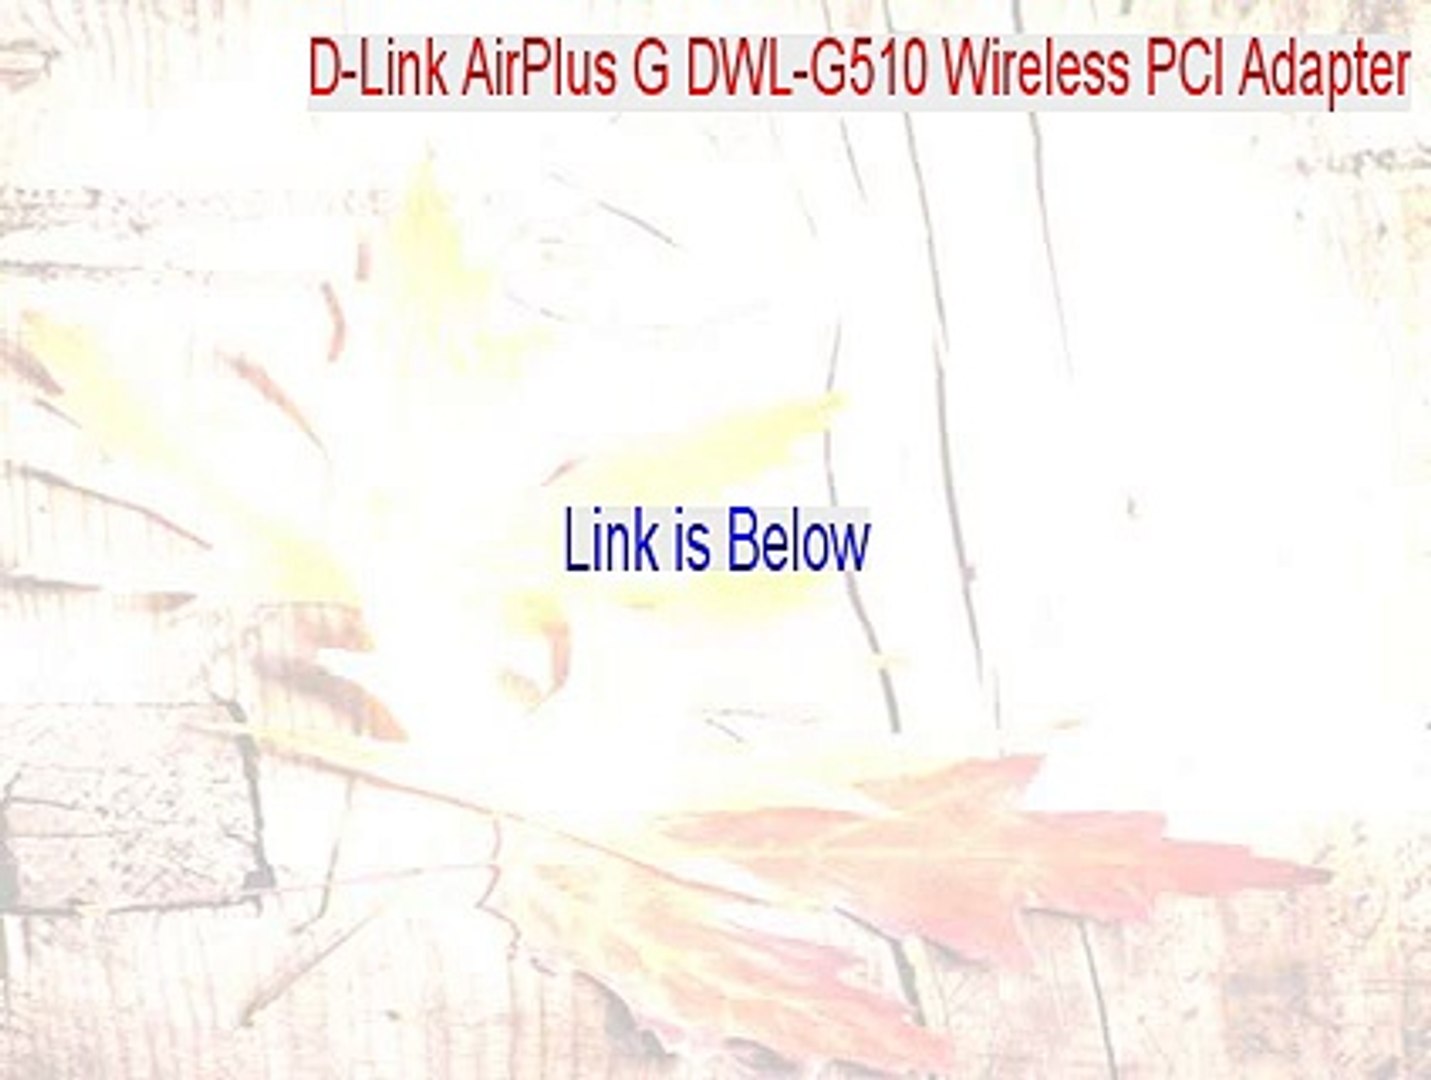 D-Link AirPlus G DWL-G510 Wireless PCI Adapter(rev.C) Cracked Download] - video Dailymotion